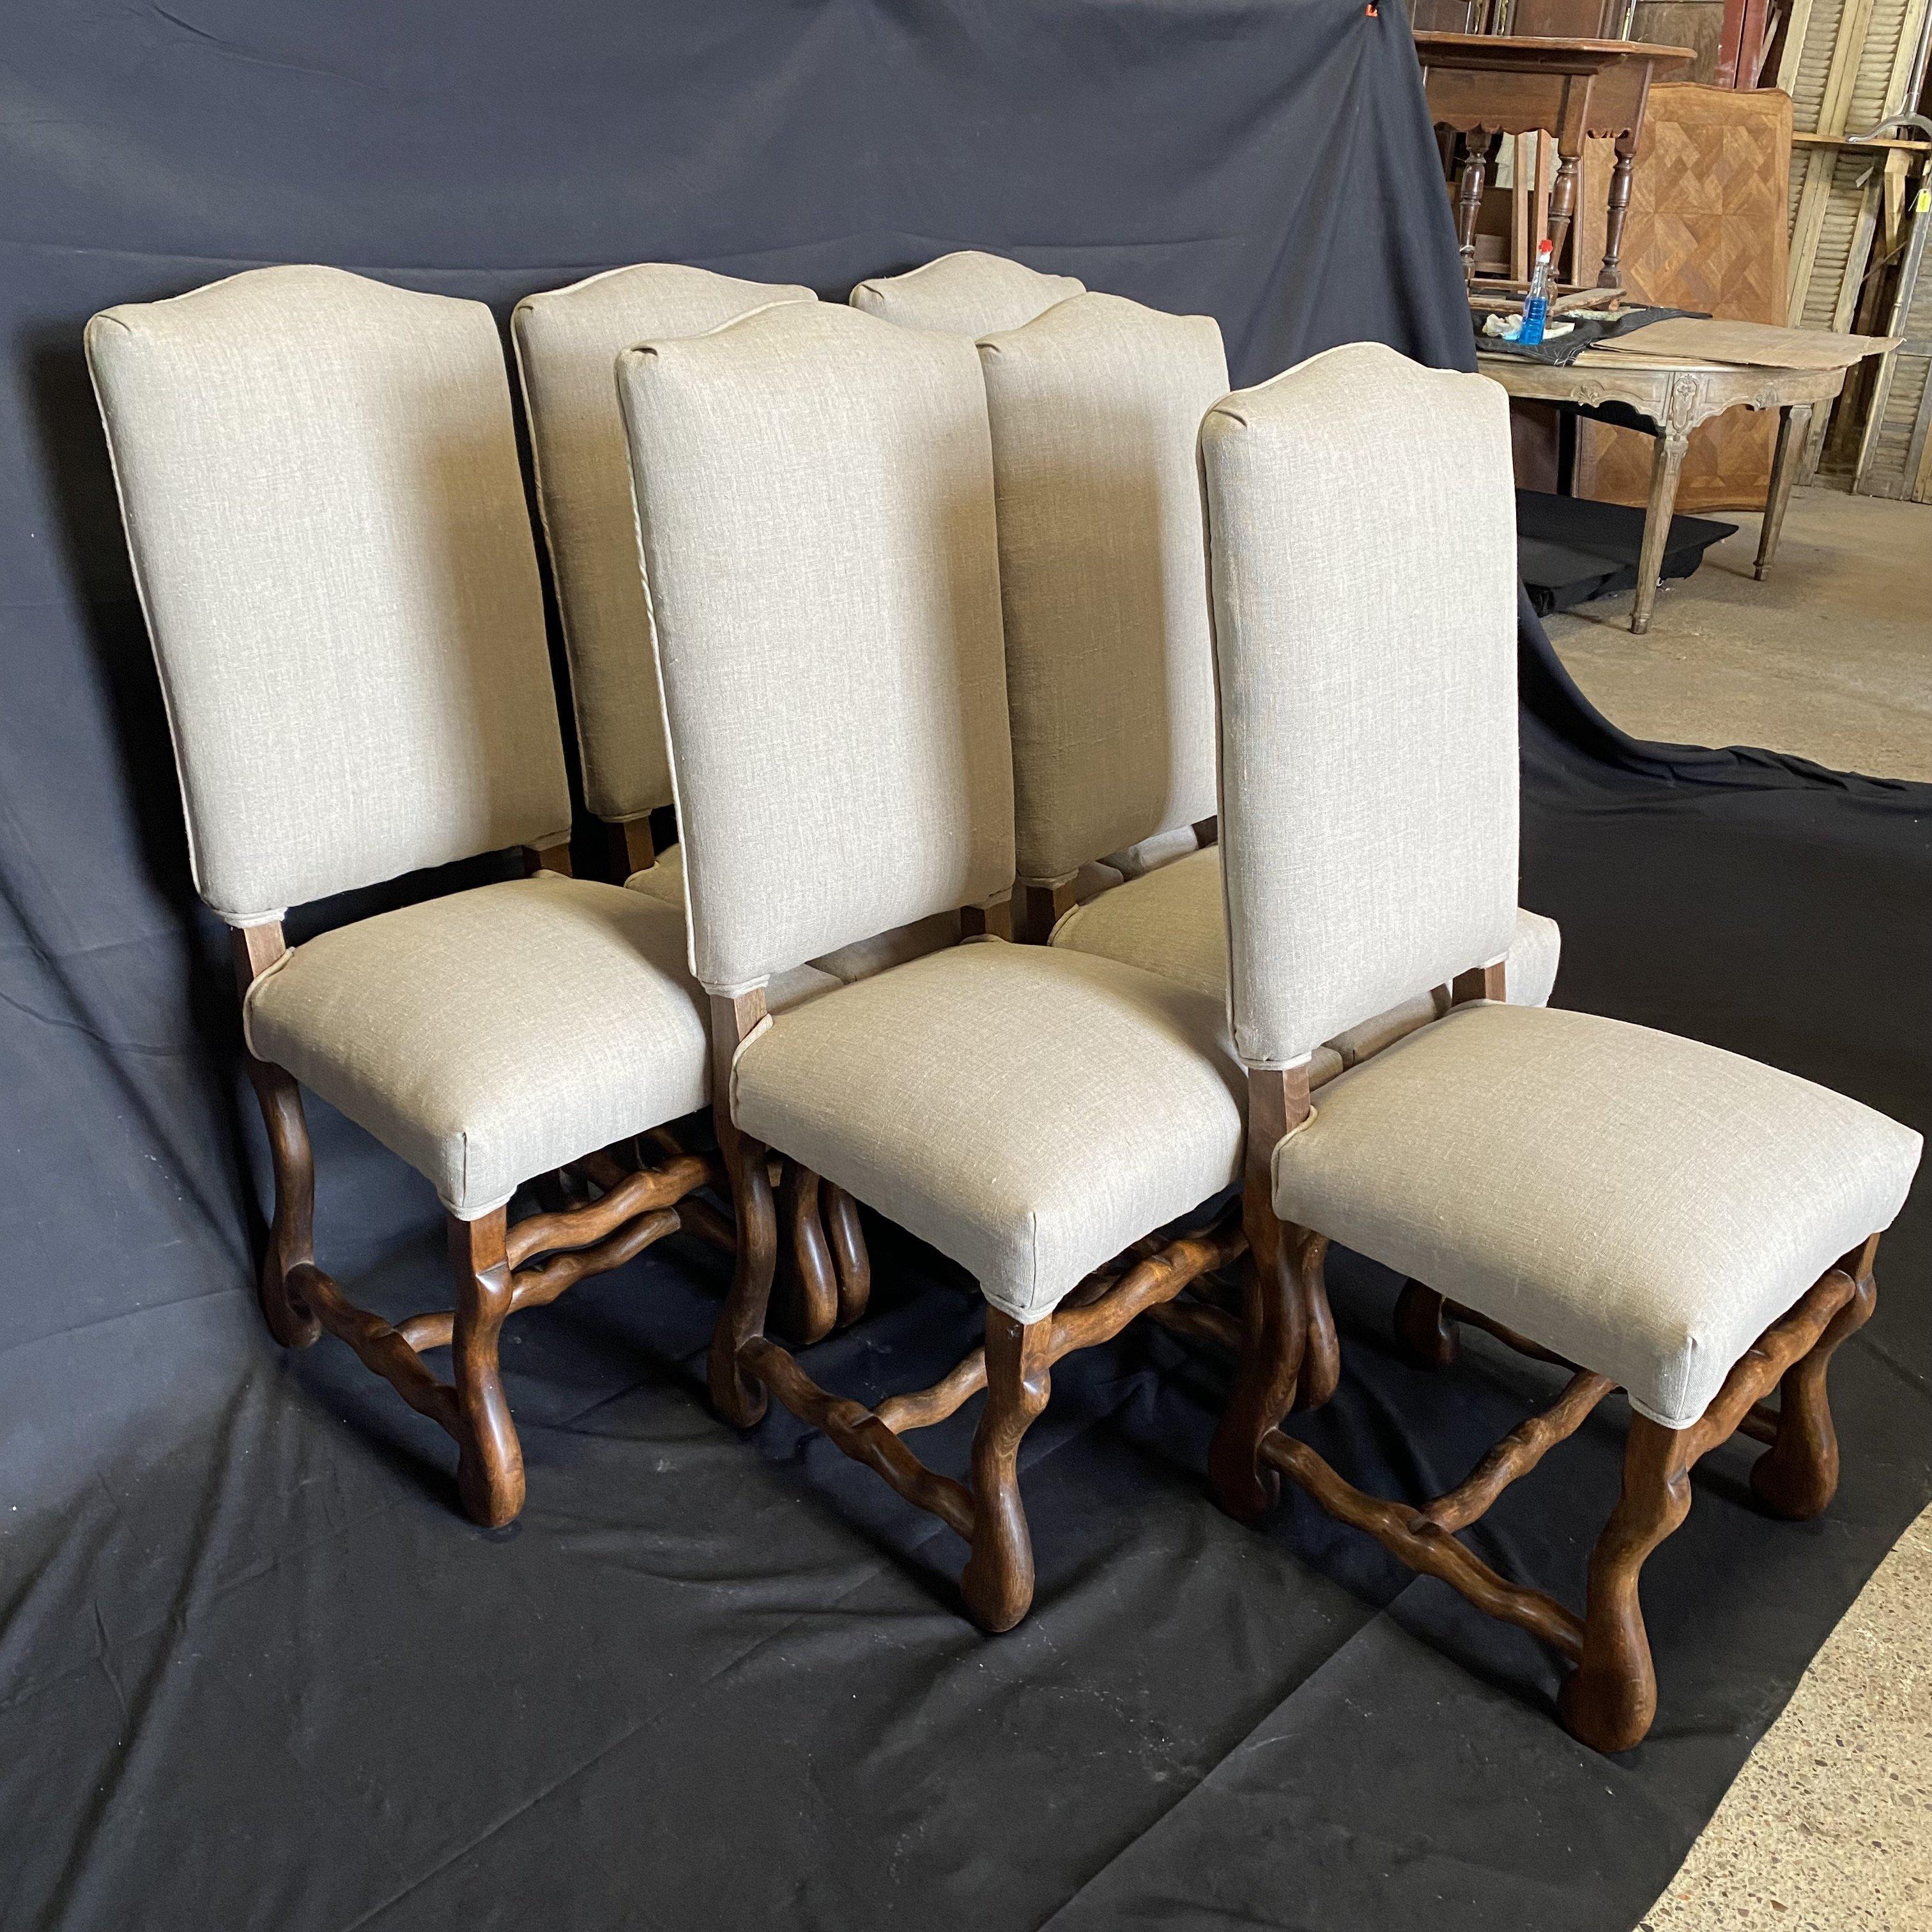 Beautiful and classic set of 6 walnut Os de Mouton side chairs from Lyon, France. Newly upholstered in a neutral french grayish beige cotton/linen blend. #5612.